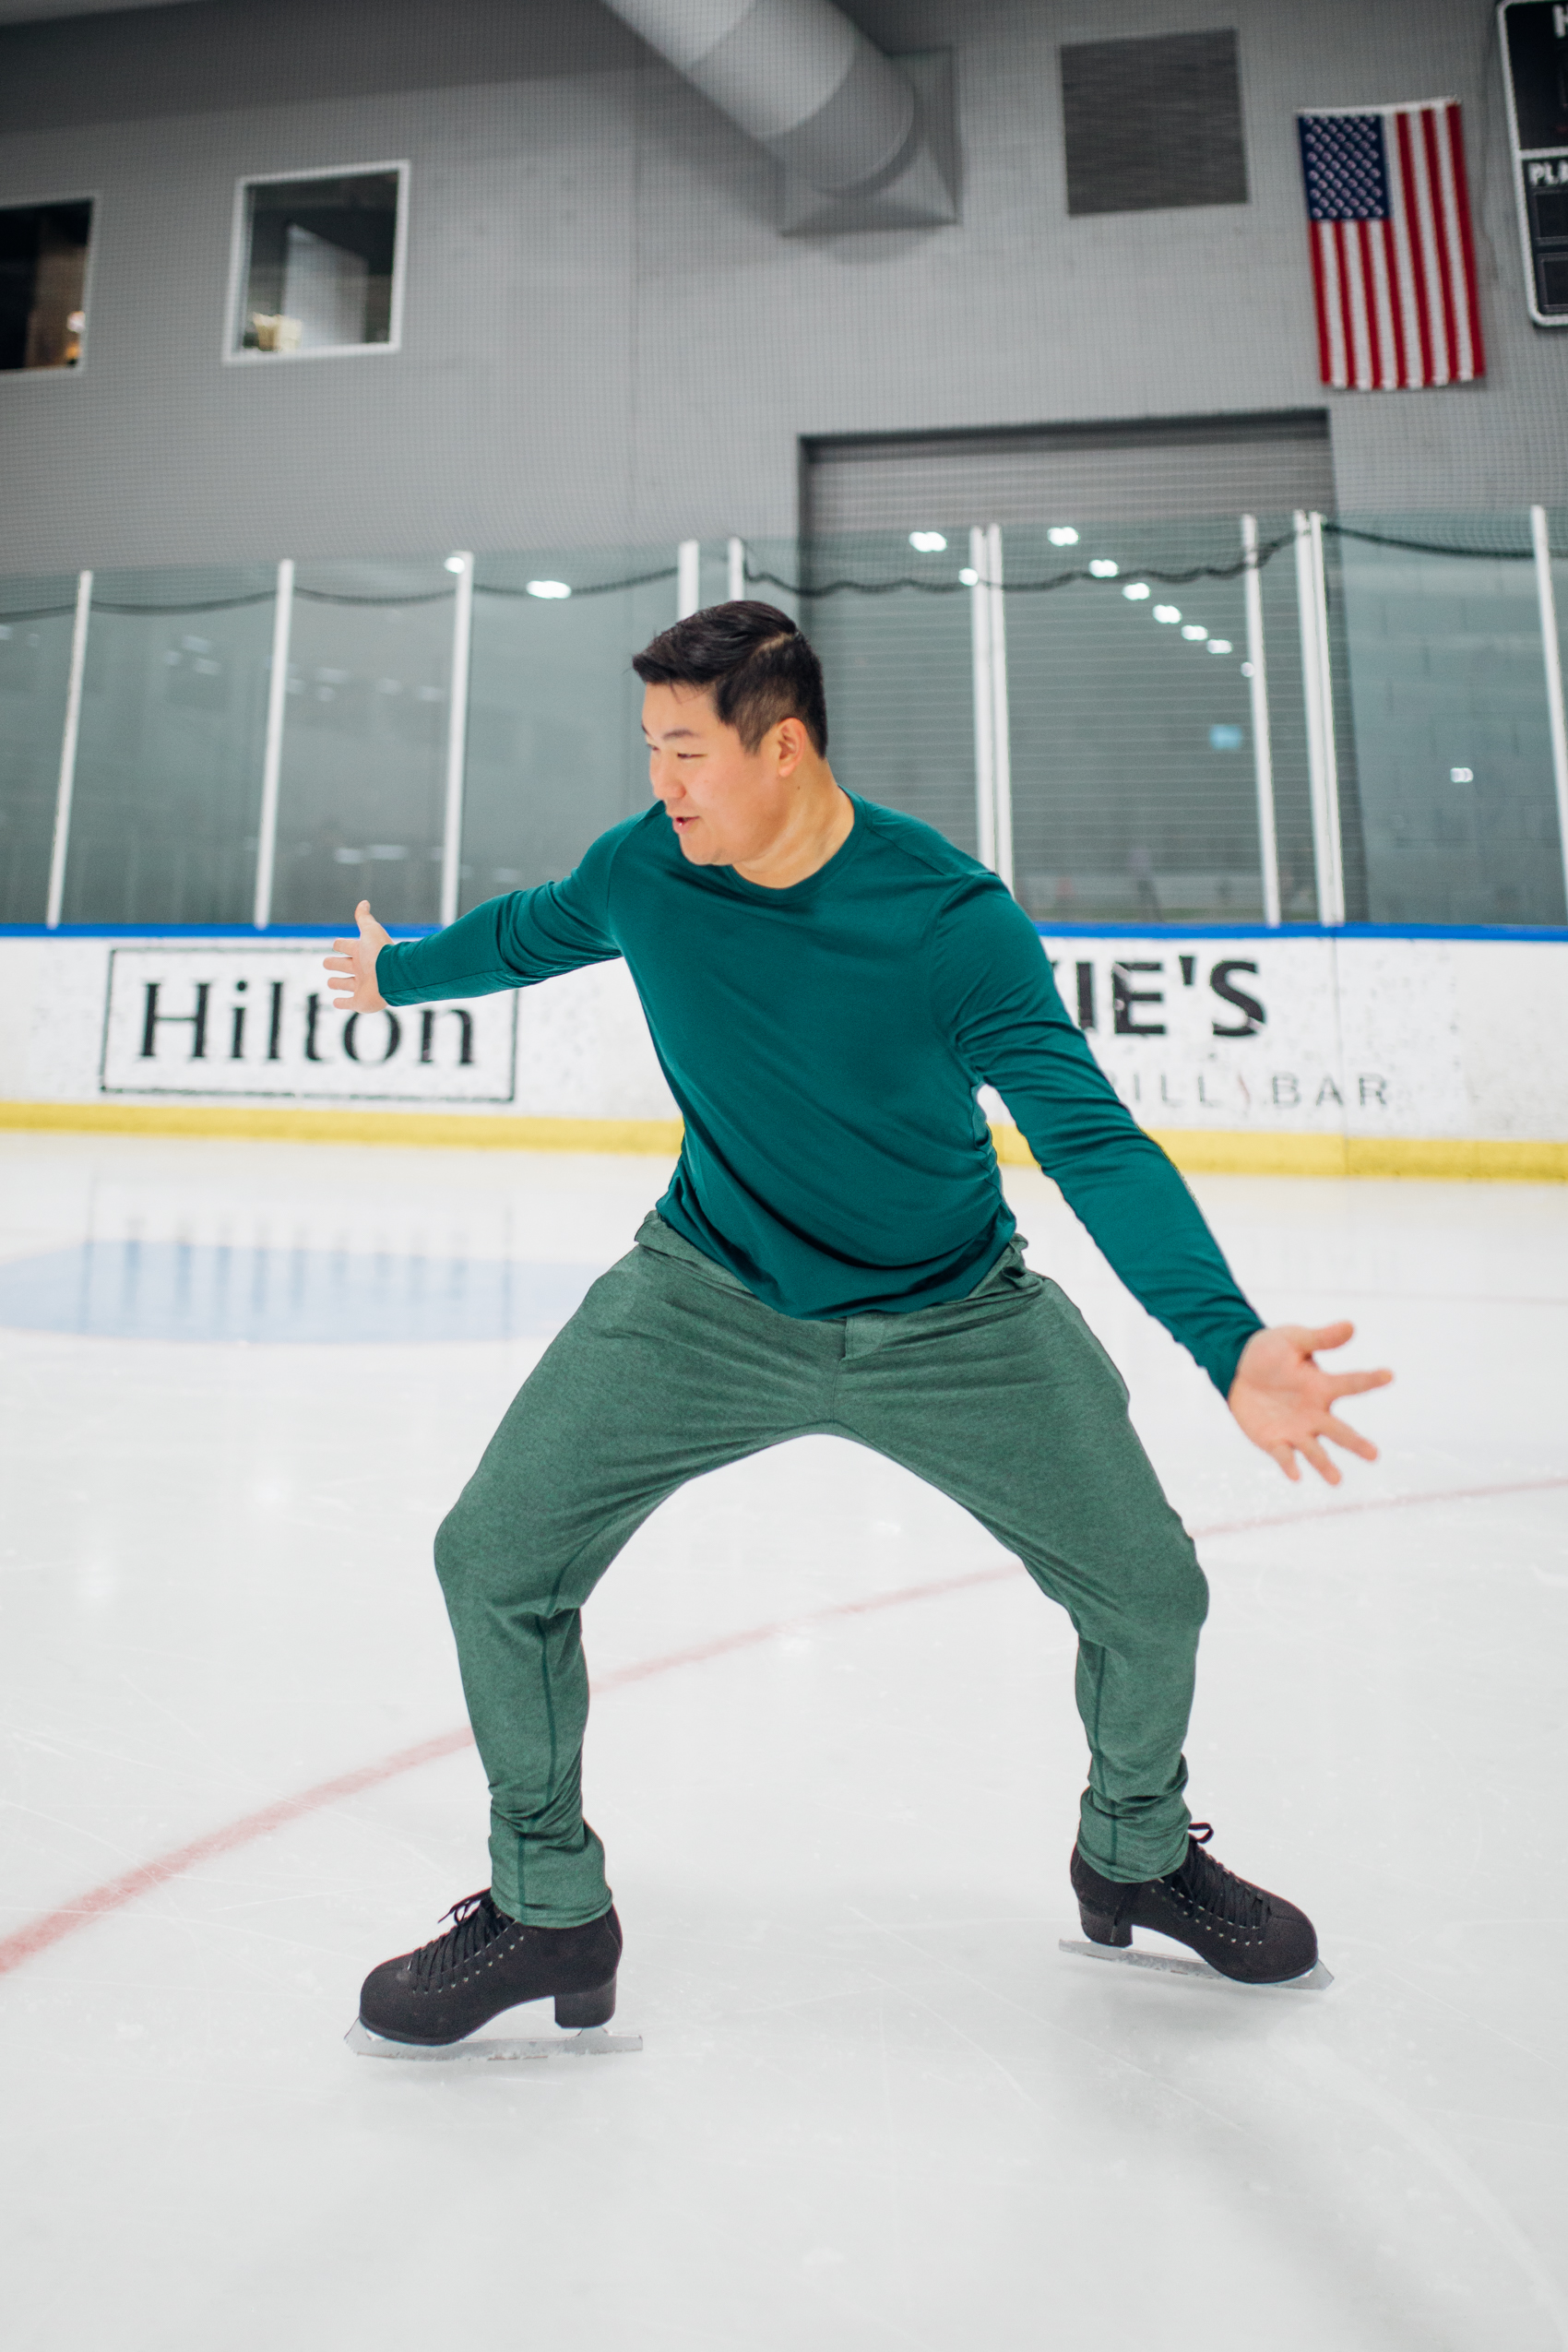 Guys ice skating outfit date night idea